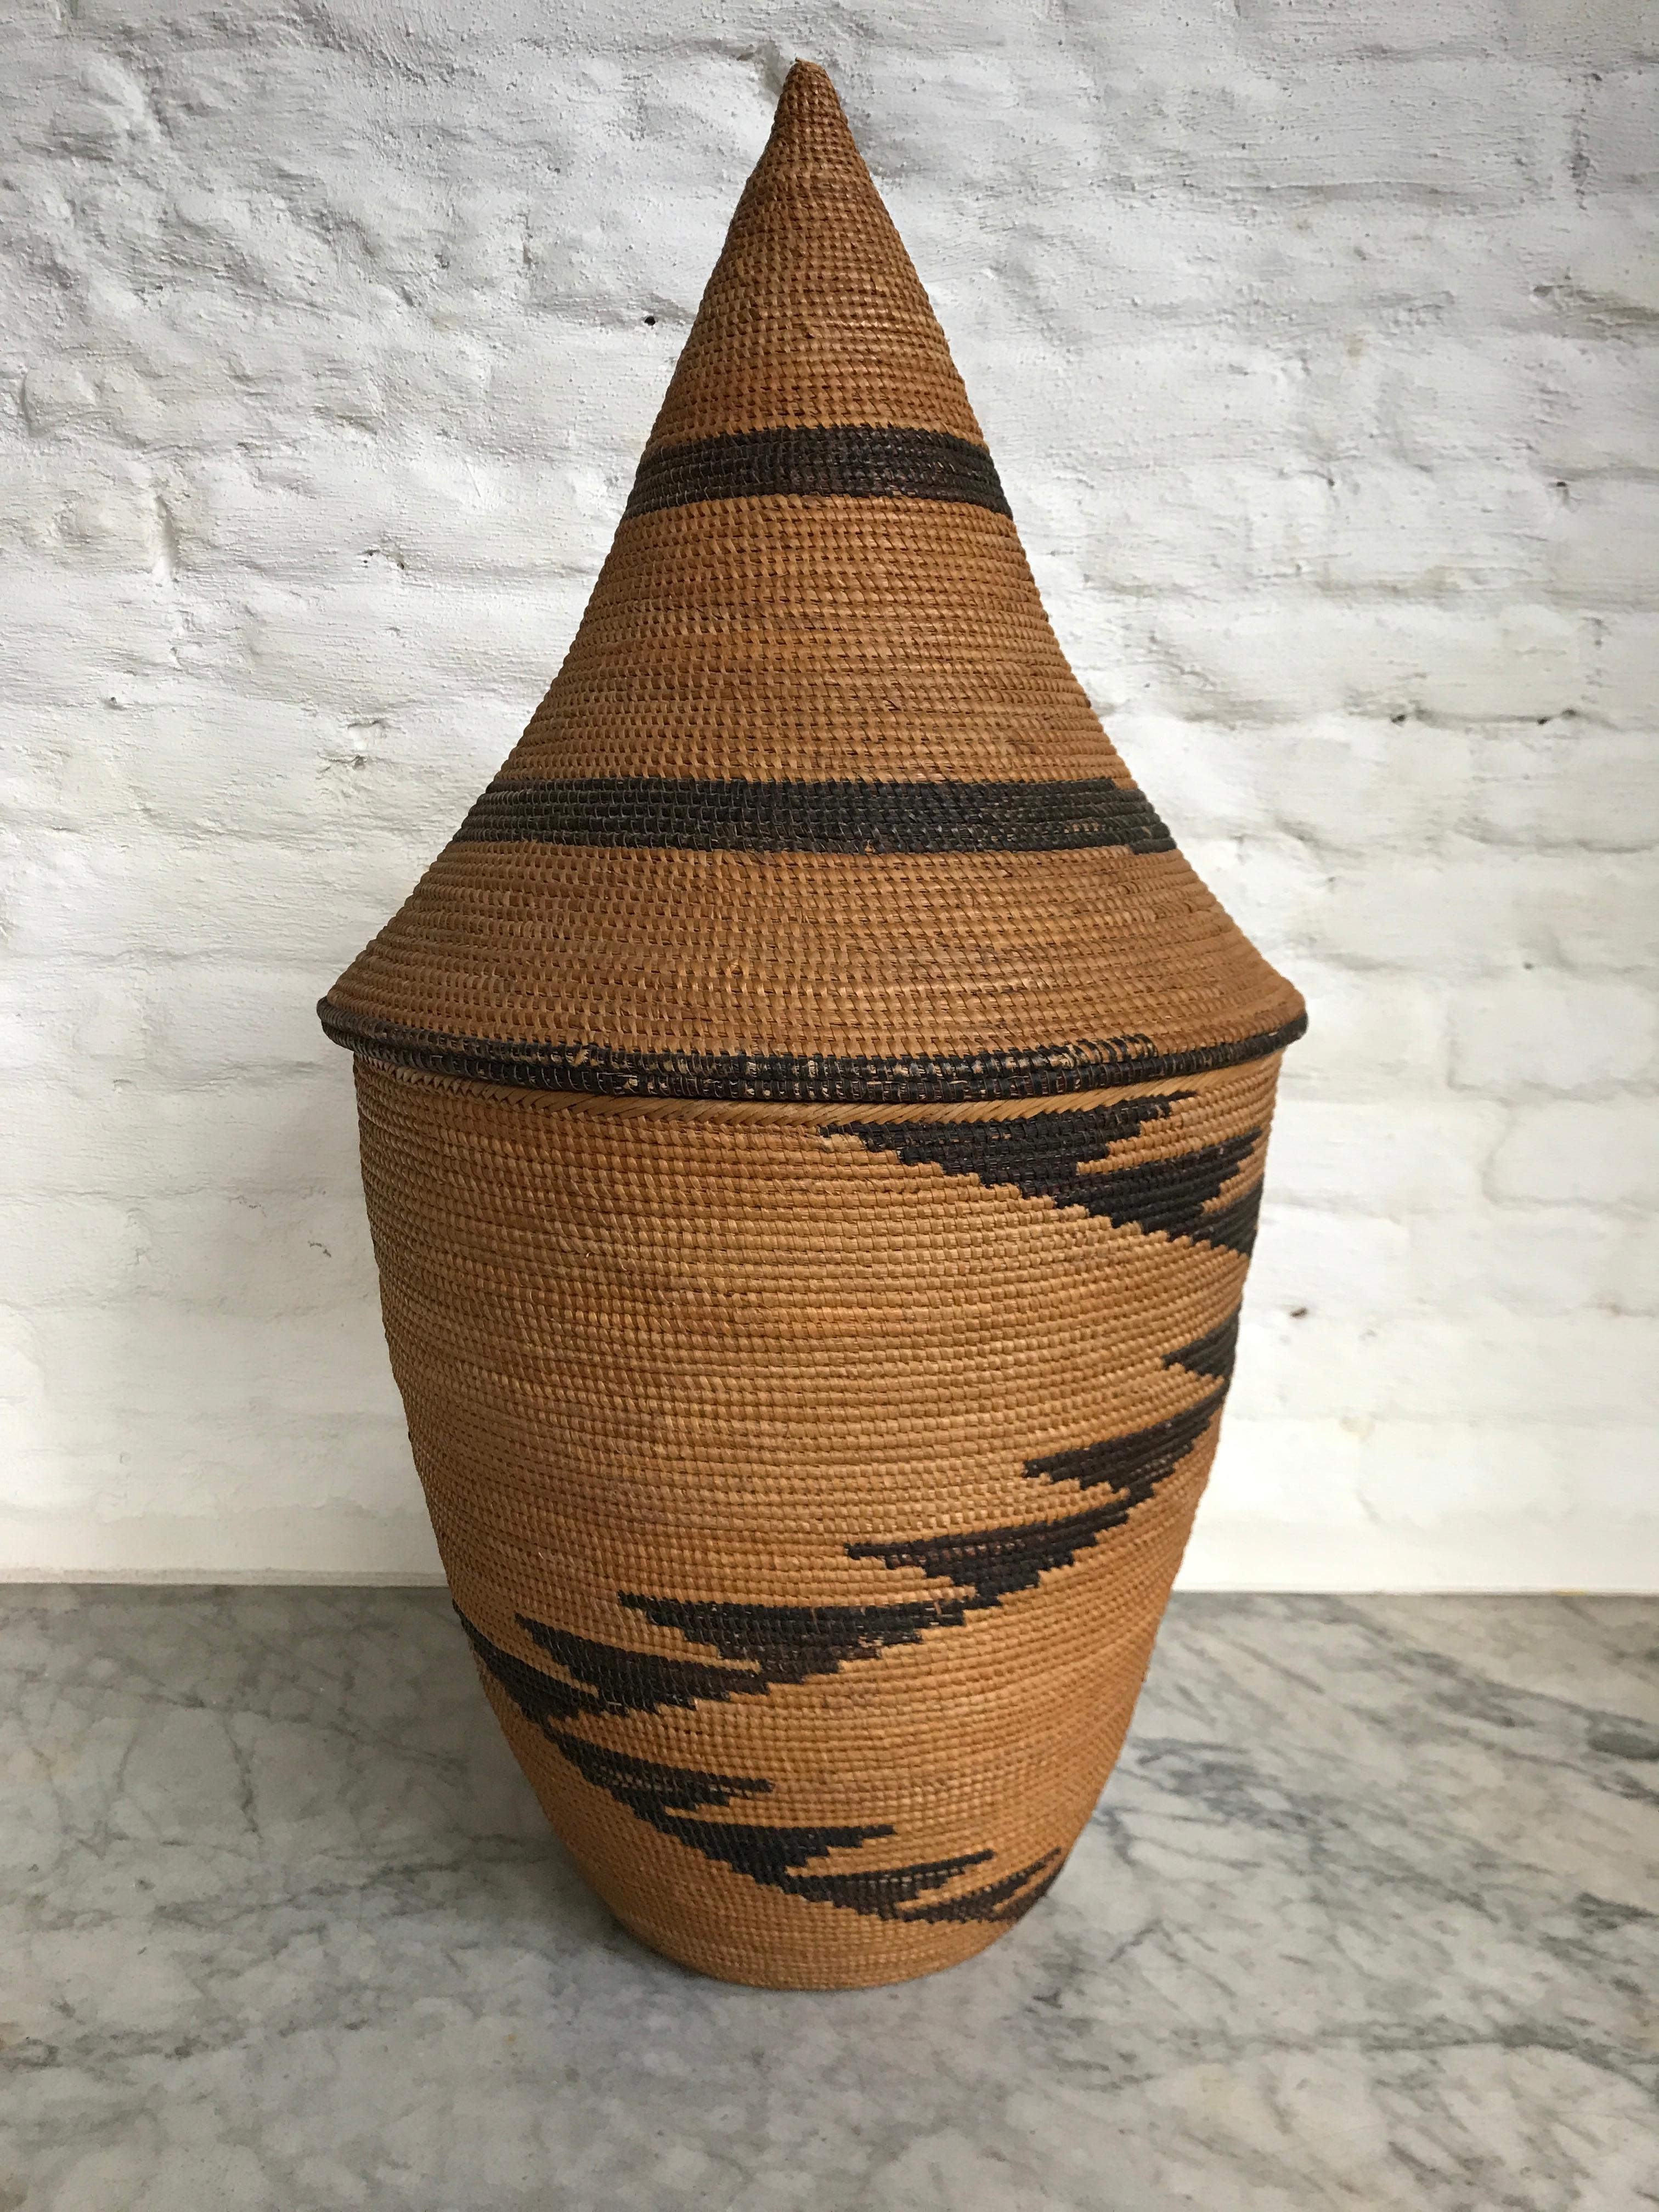 19.75 inches tall mid-20th century handmade lidded Agaseki basket. Tightly woven and in very good condition.
This type of baskets are called Agaseki and were made from vegetable fibers of sisal and papyrus trees (Nigwegwe). The grasses of these